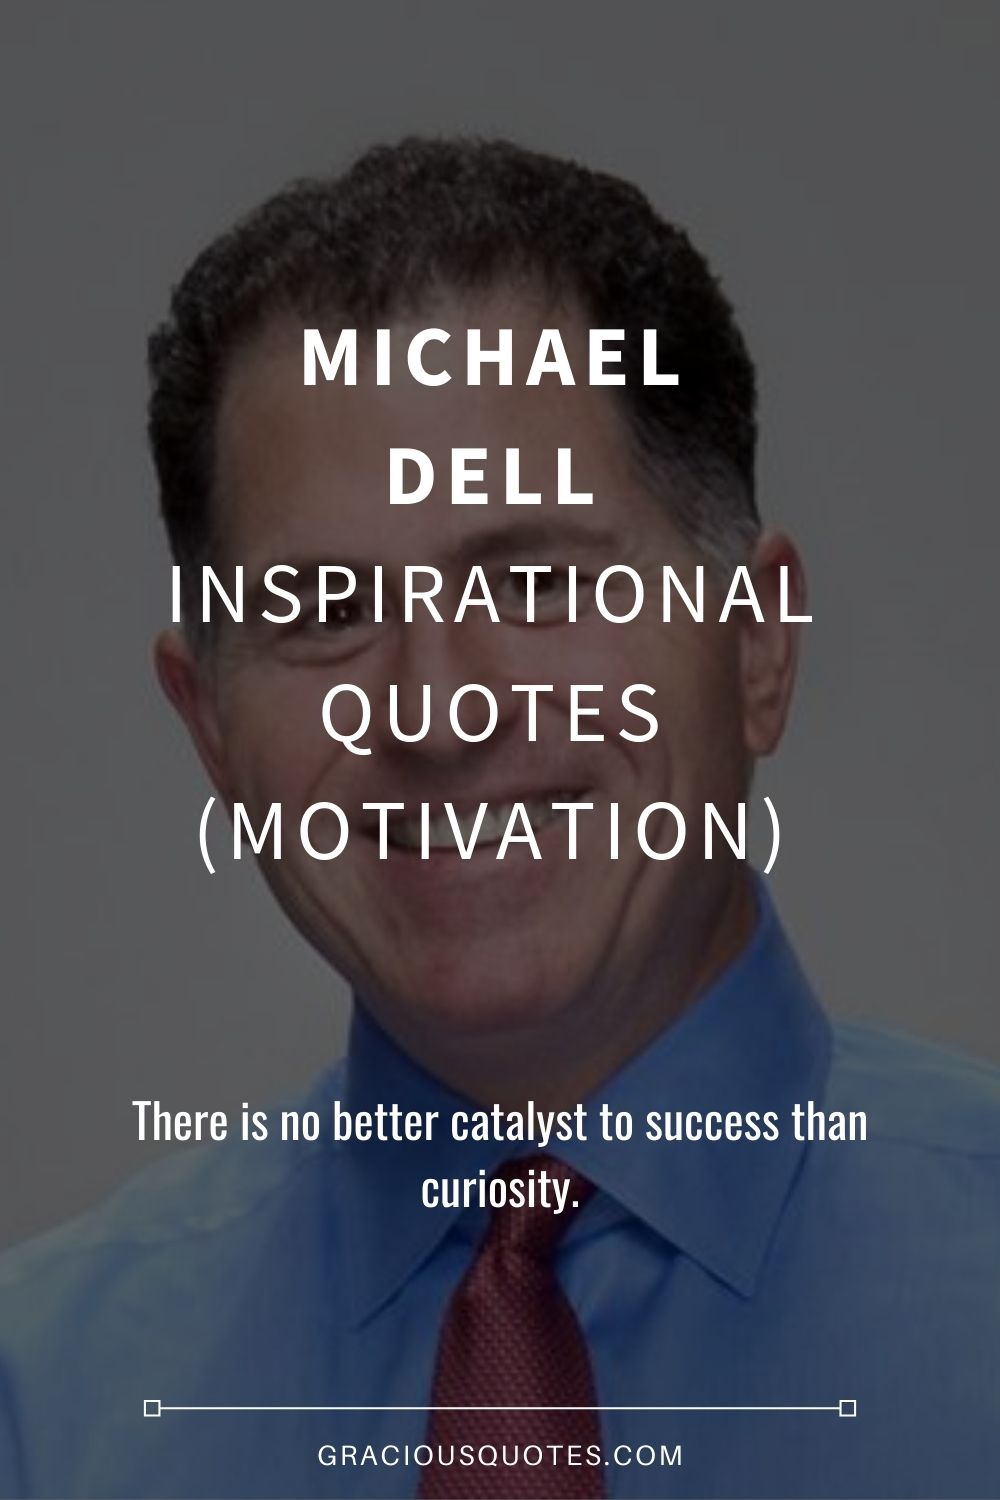 Michael Dell Inspirational Quotes (MOTIVATION) - Gracious Quotes